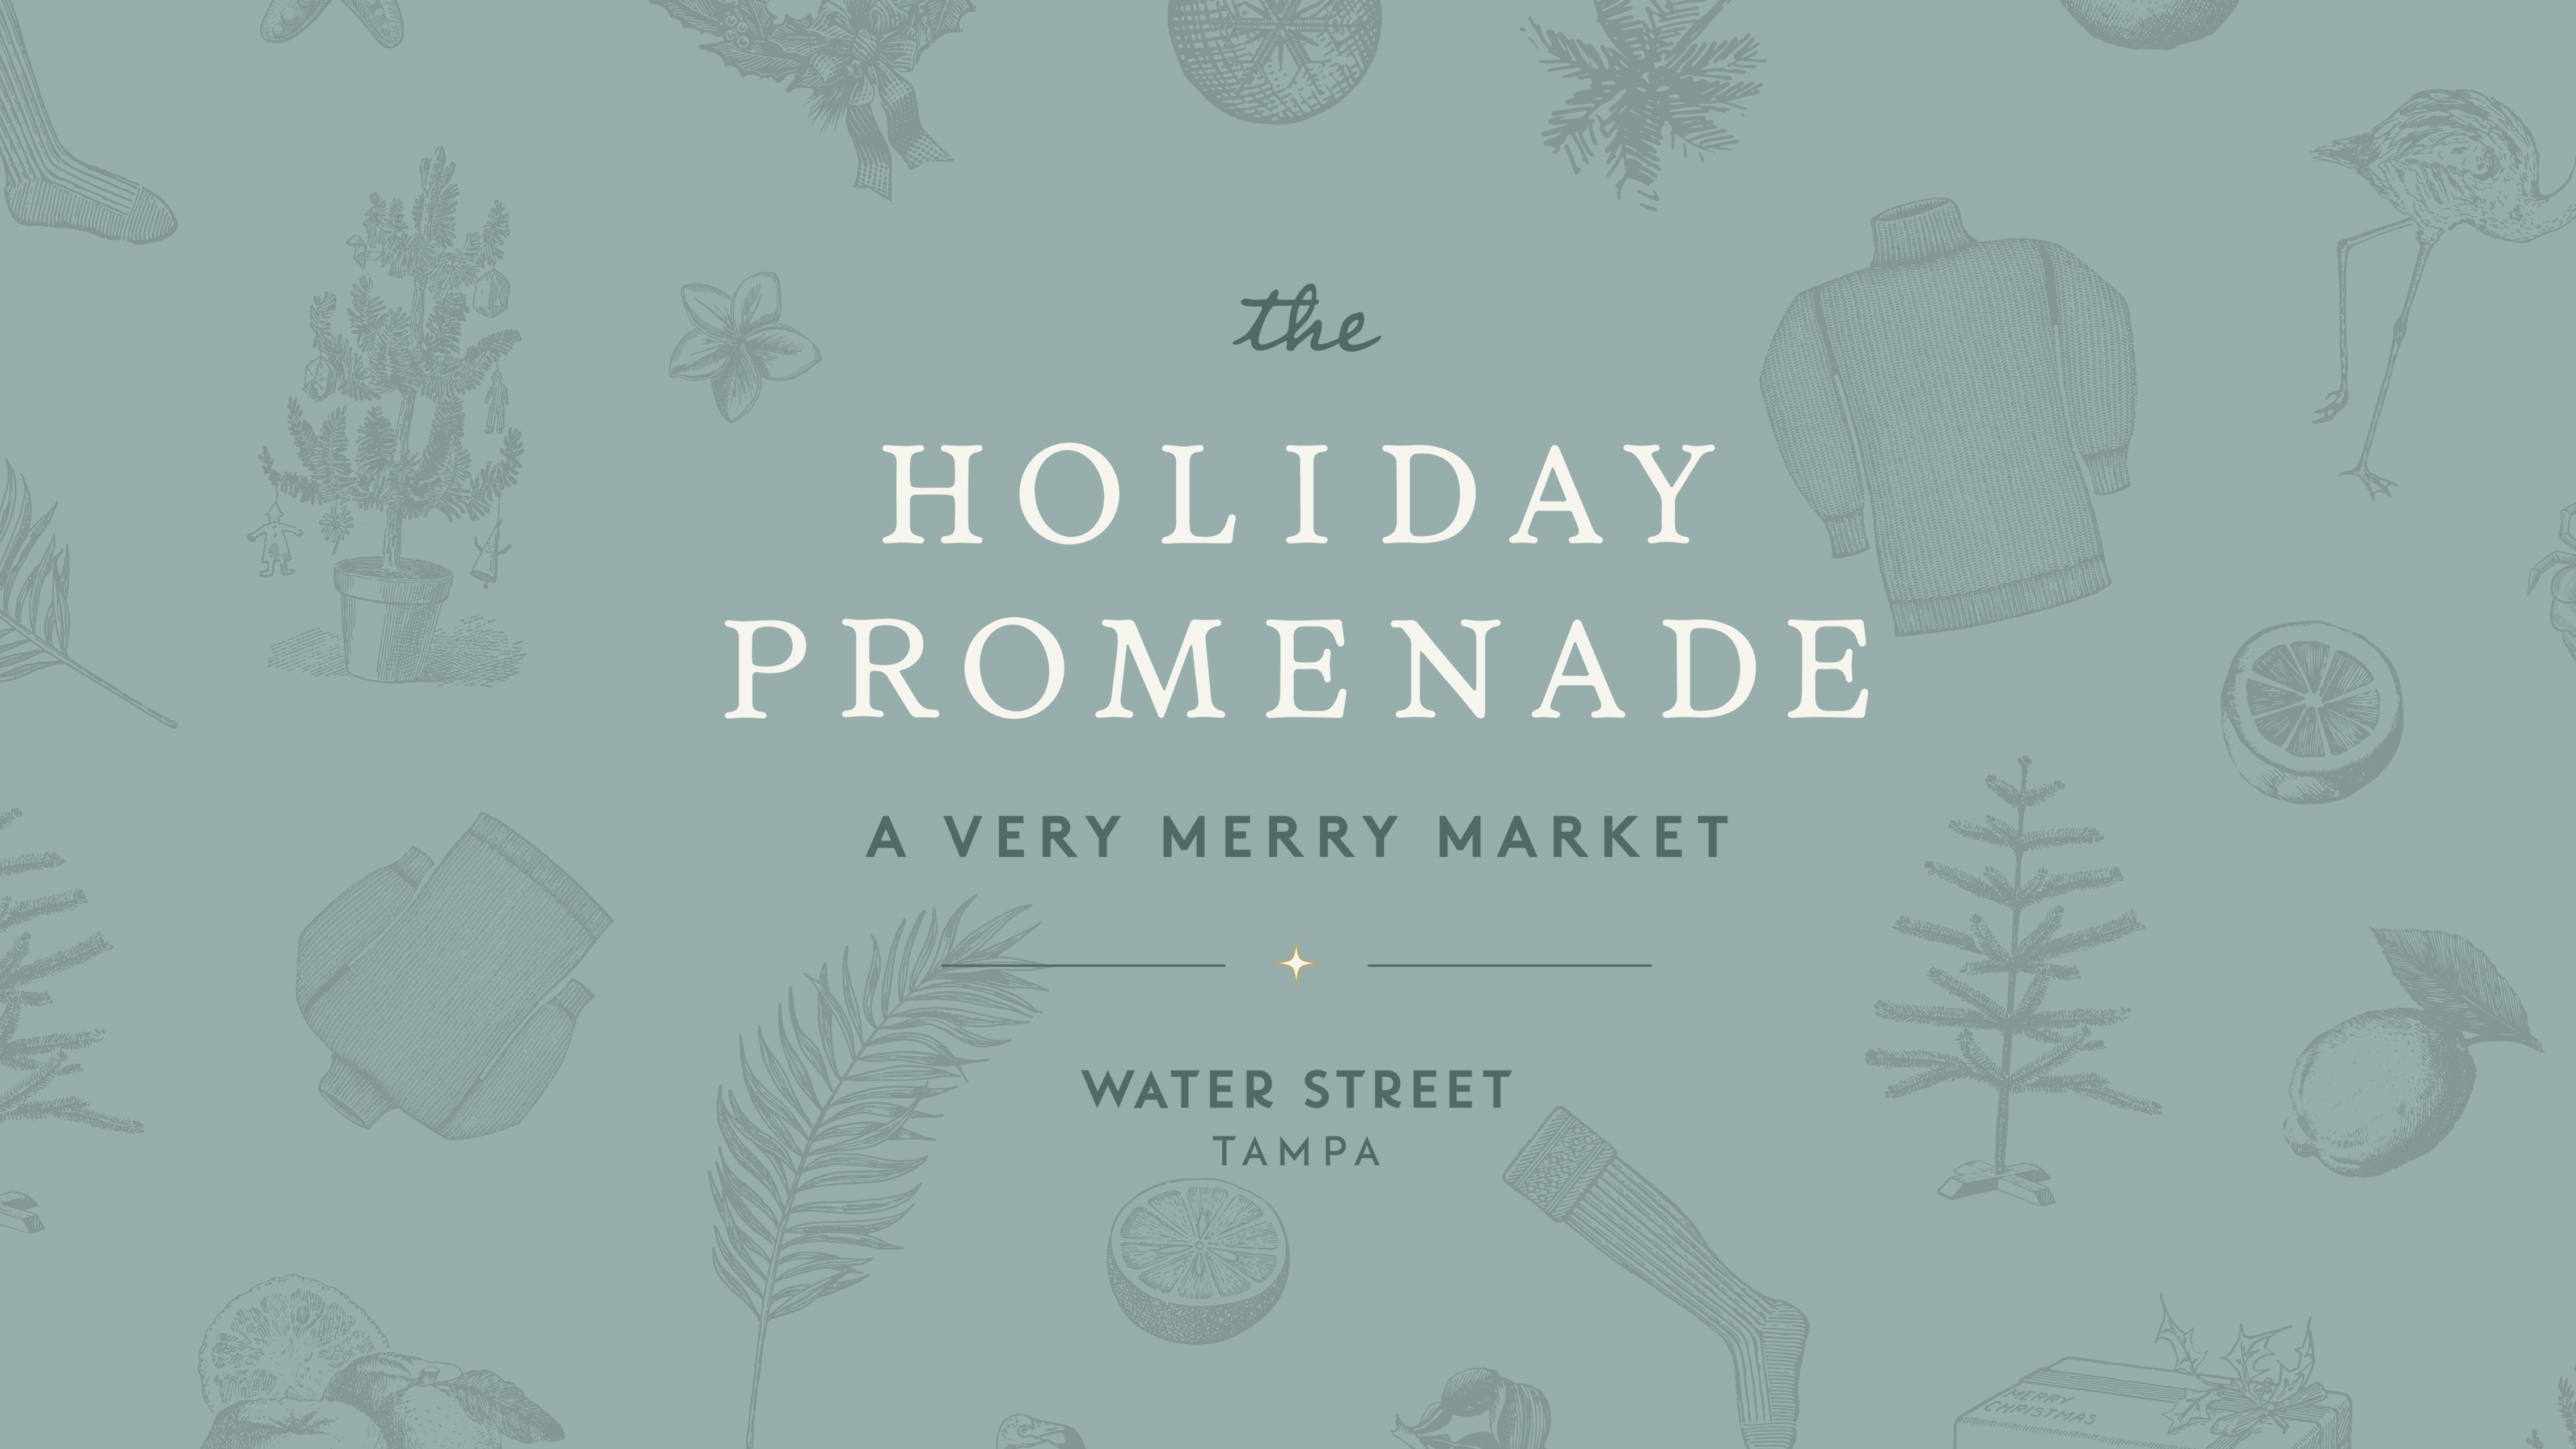 An graphic illustration of the Holiday Promenade Event